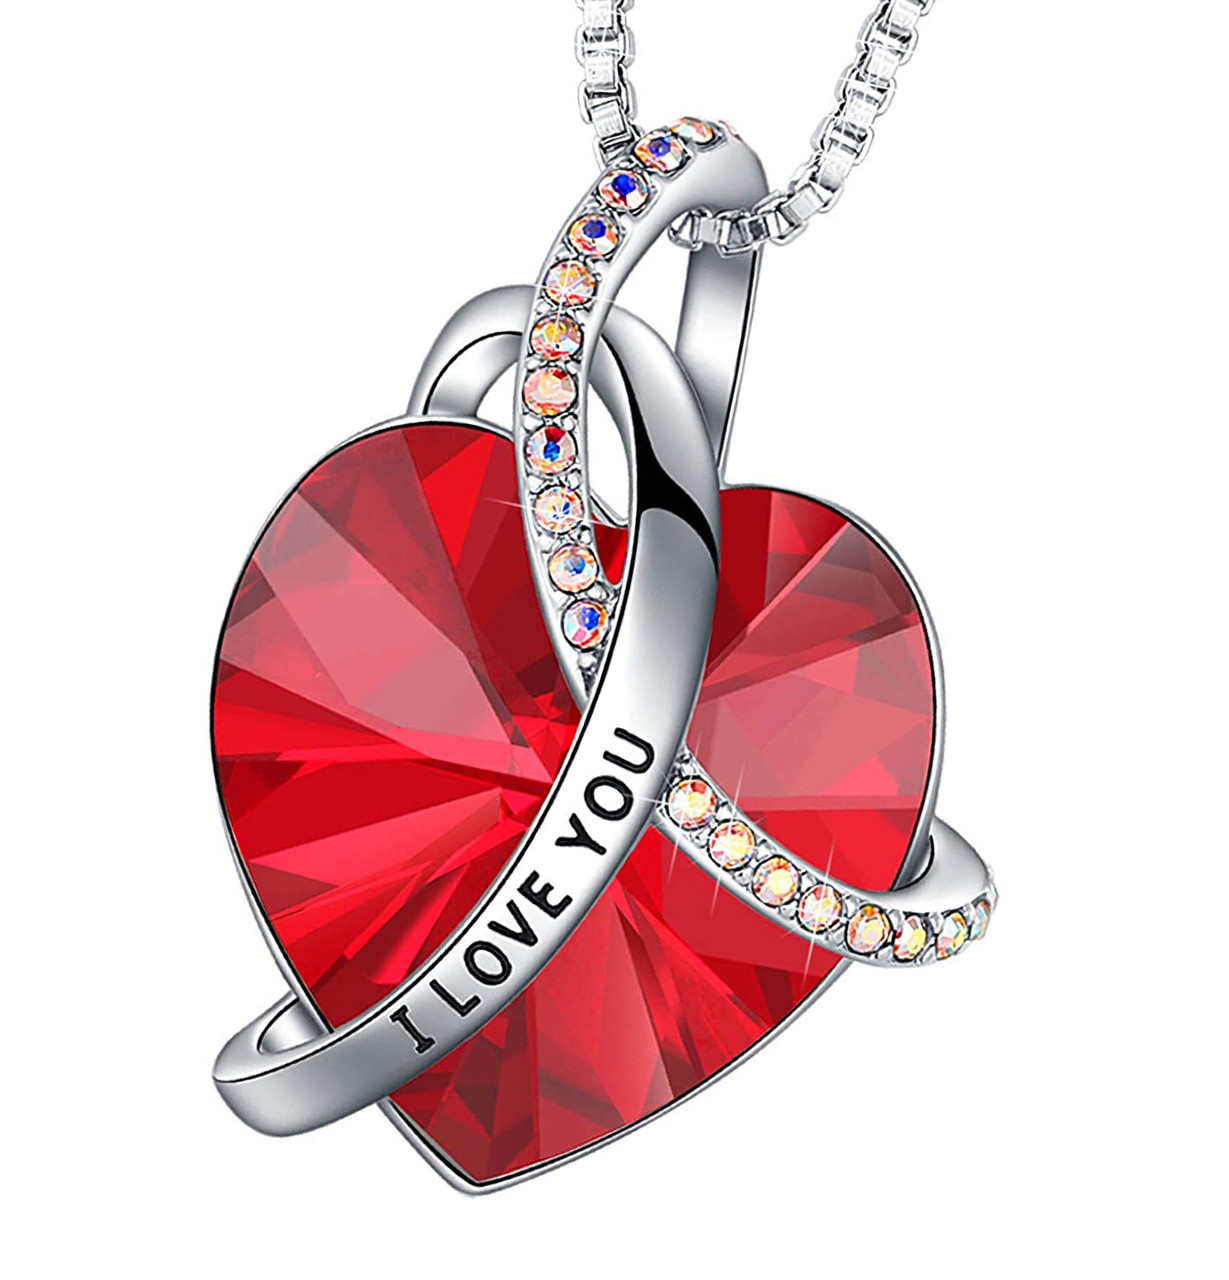 Dark Red I Love You Necklace Heart Crystal Pendant with CZ stones - and 18" Chain Necklace. Gift for Lover, Girl Friend, Wife, Valentine's Day Gift, Mother's Day, Anniversary Gift. I Love You Necklace.